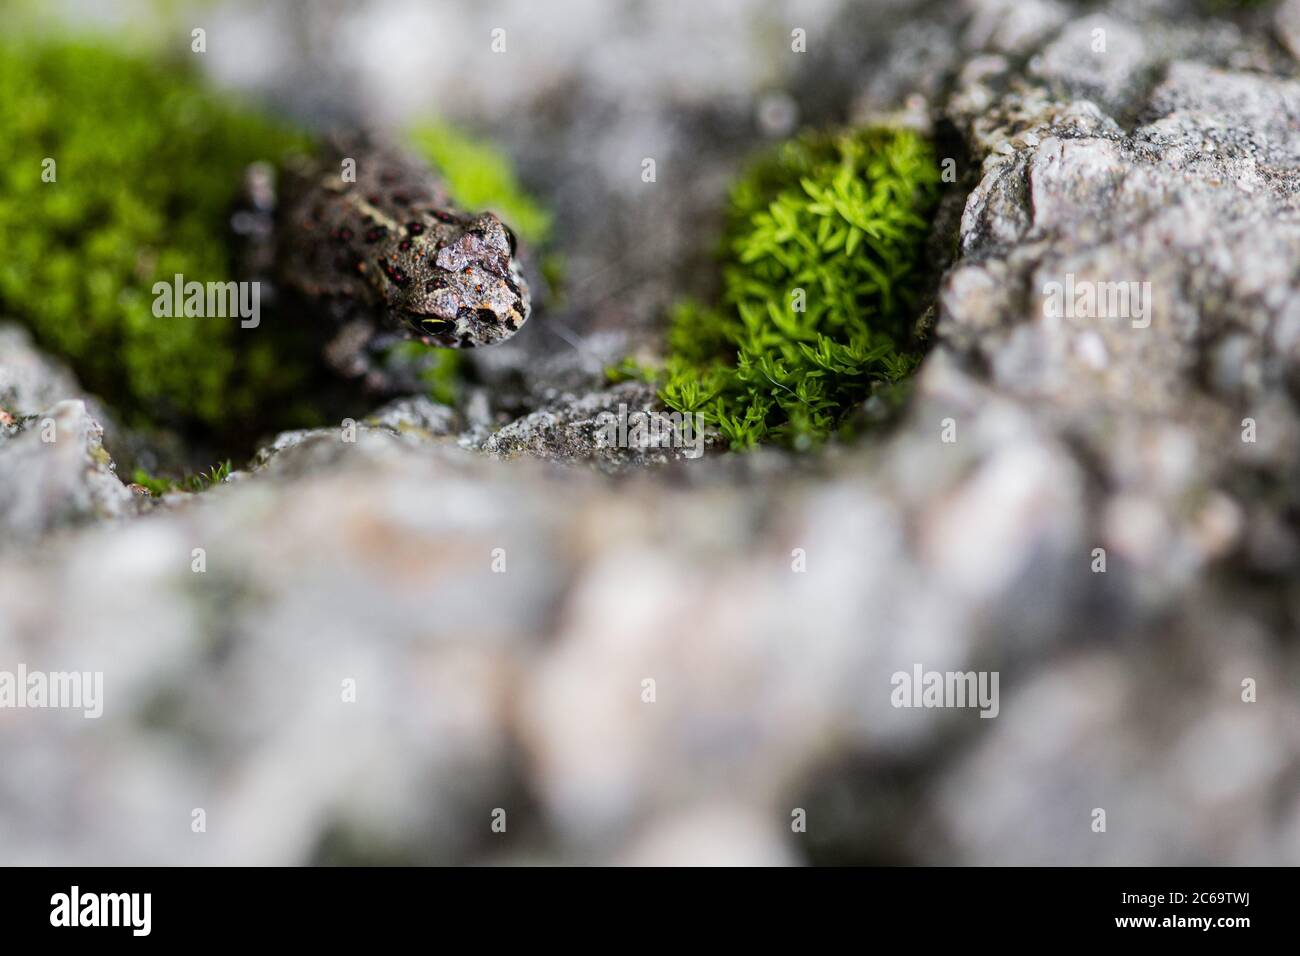 Tiny little frog camouflaged on a grey rock muddy background Stock Photo